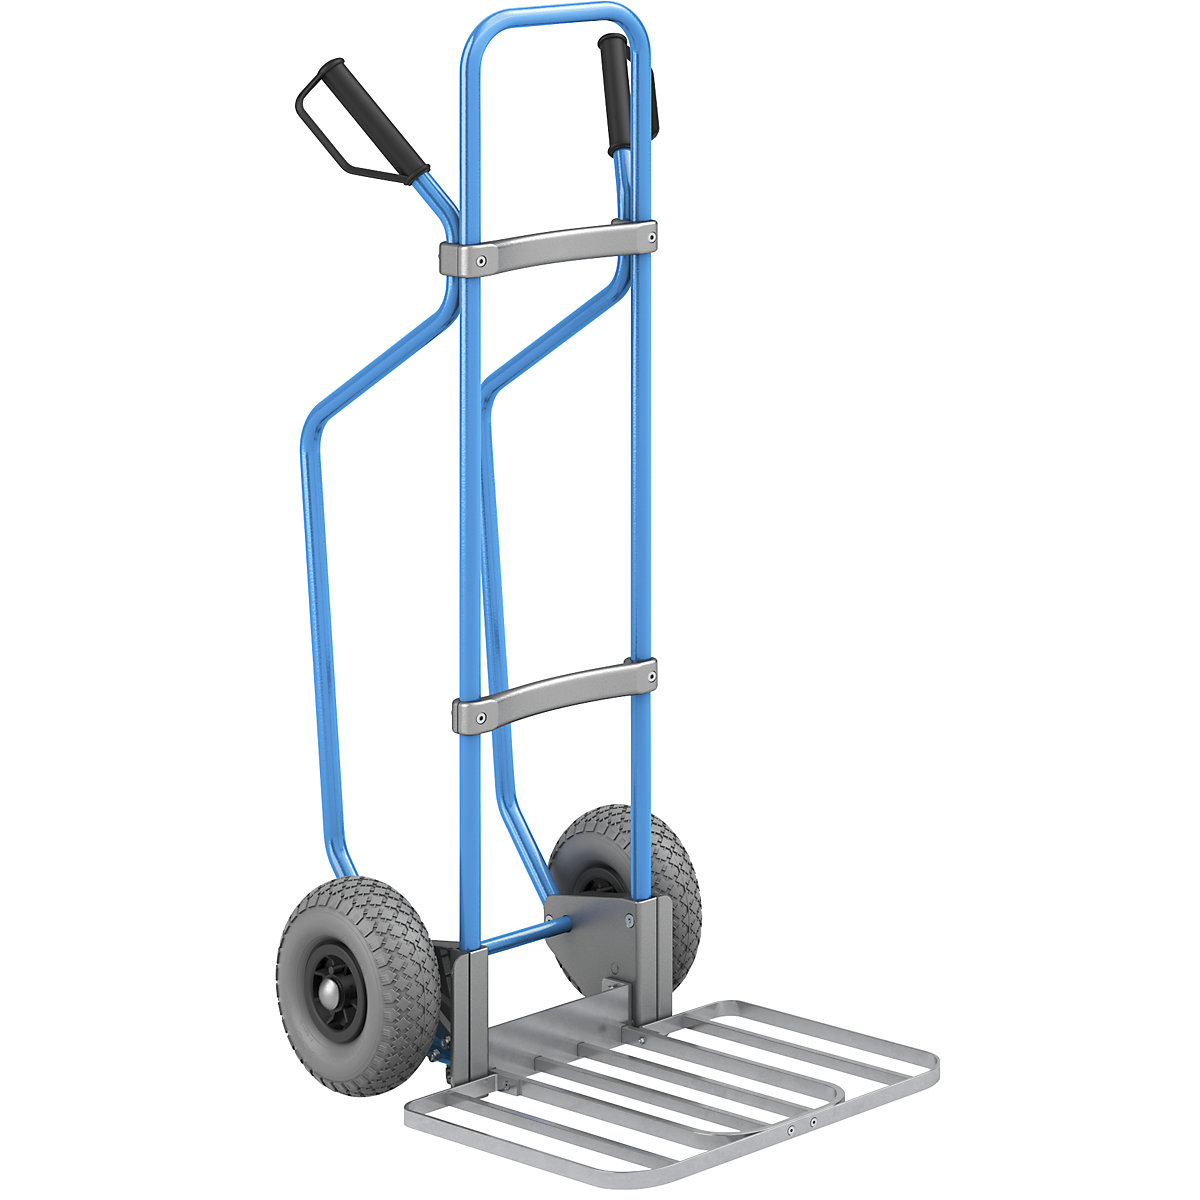 Sack truck with runners, blue – eurokraft pro, parcel footplate WxD 430 x 450 mm, zinc plated, PU tyres, 5+ items-2